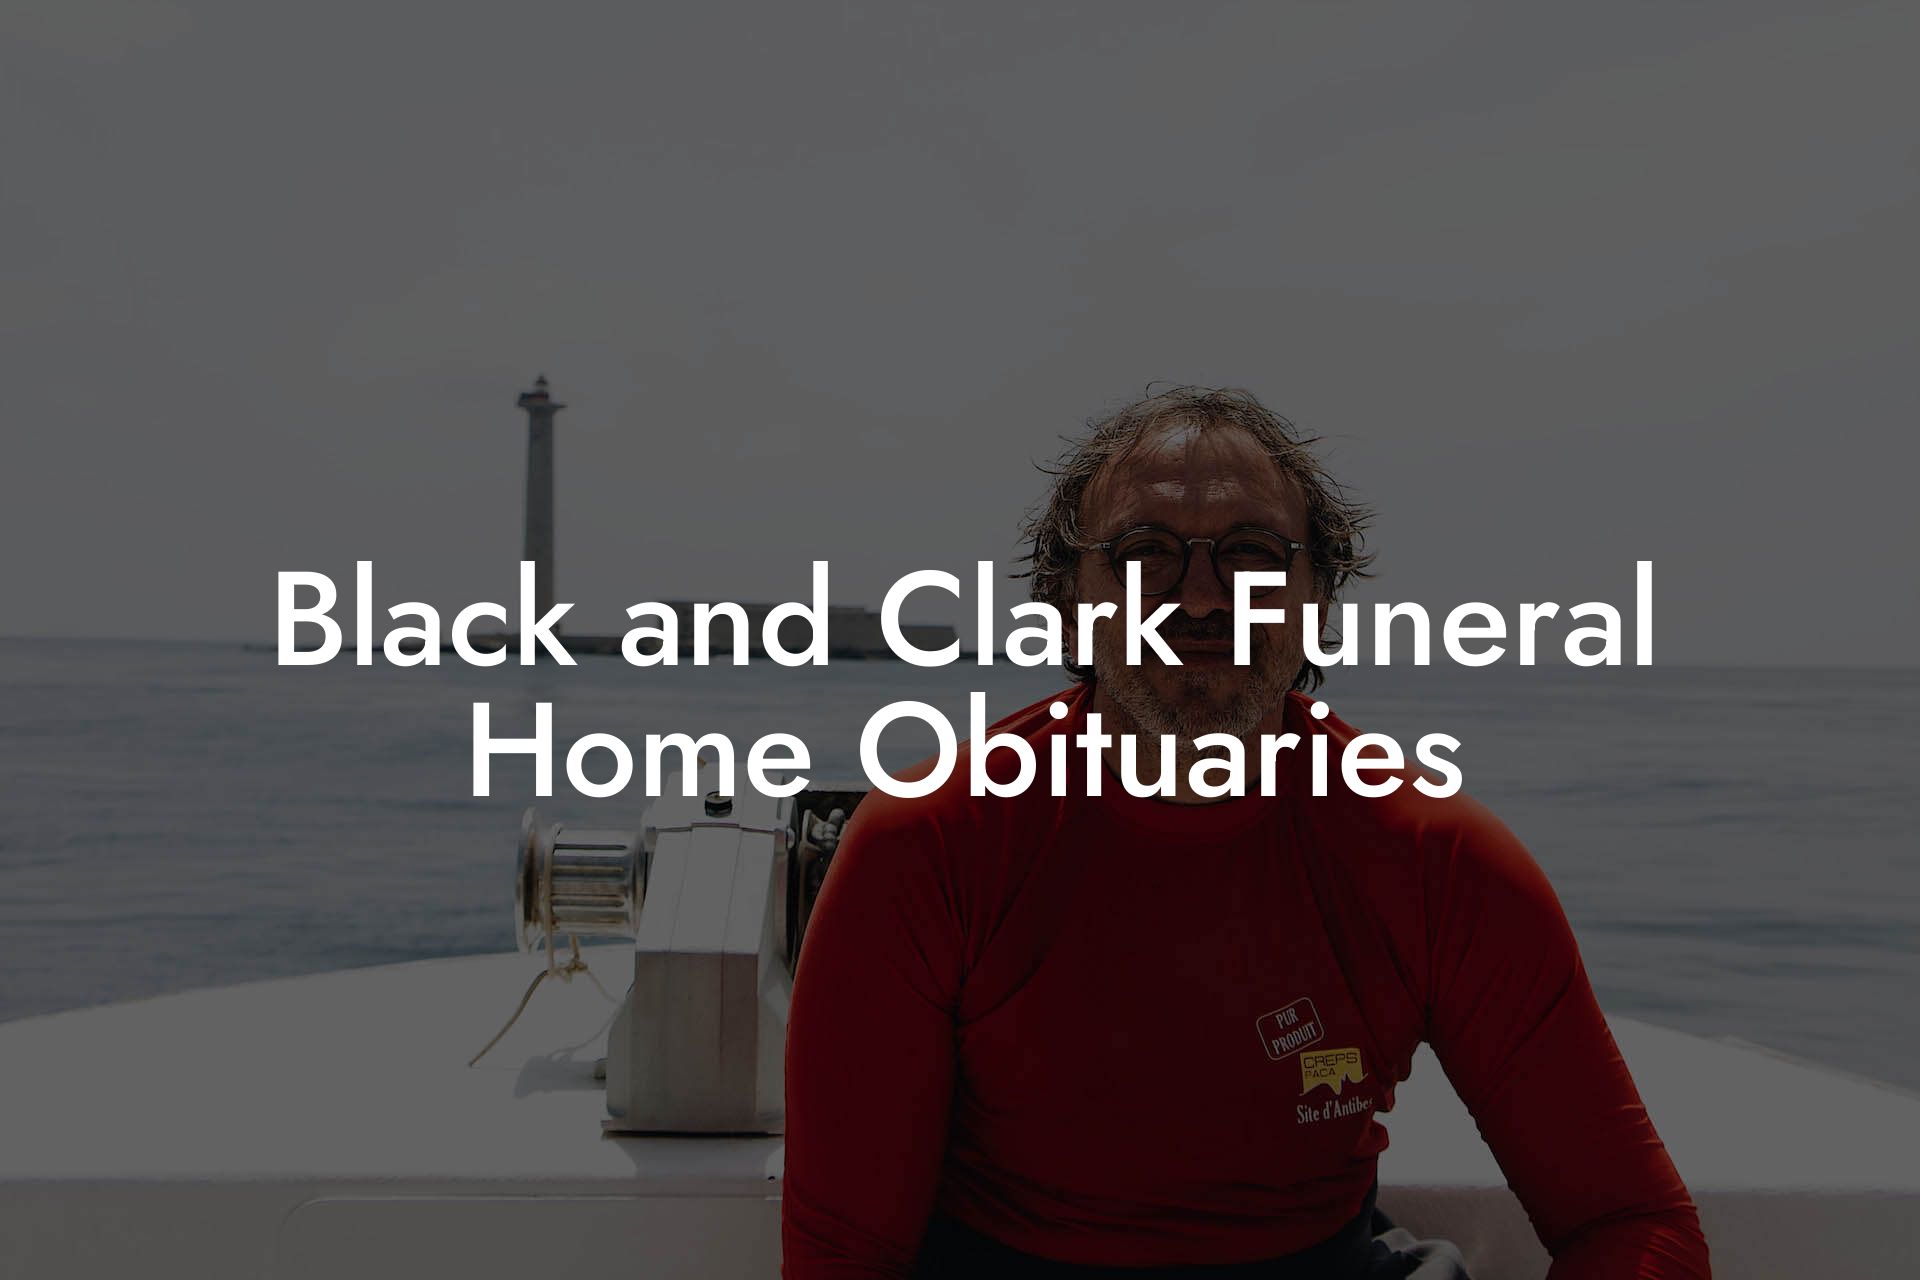 Black and Clark Funeral Home Obituaries